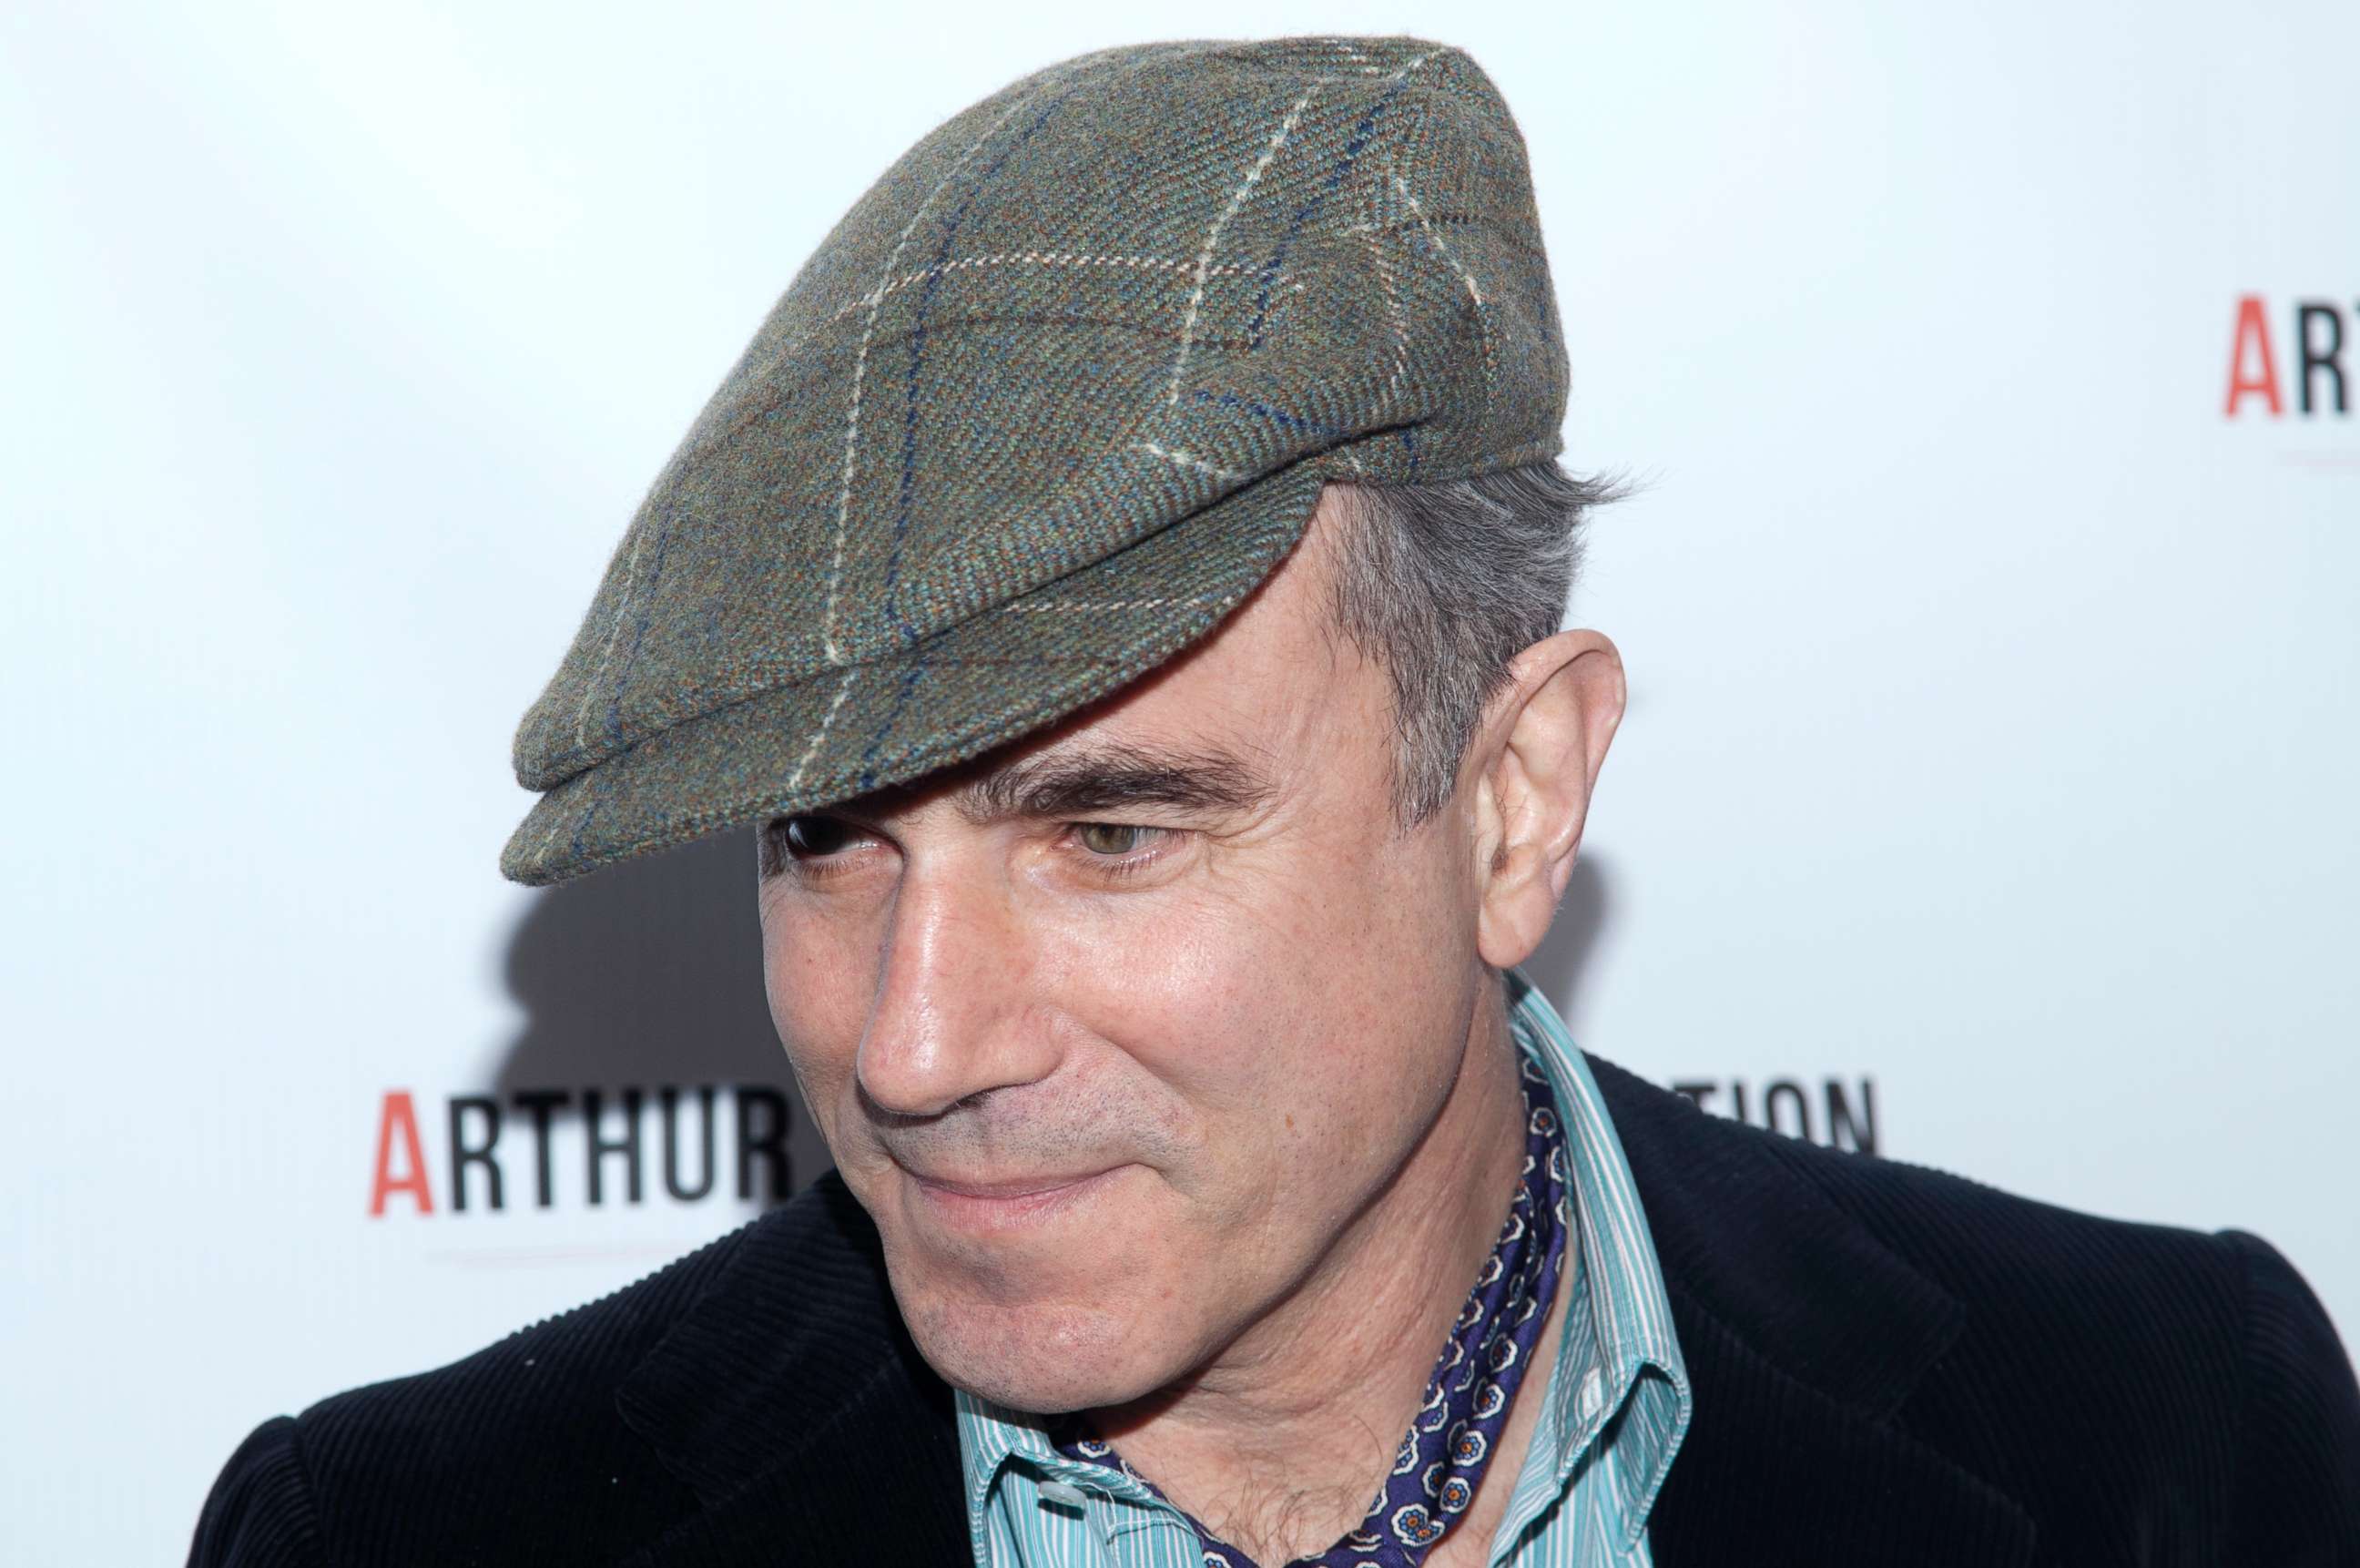 PHOTO: Daniel Day-Lewis attends the "Arthur Miller - One Night 100 Years" benefit at the Lyceum Theatre in New York City.